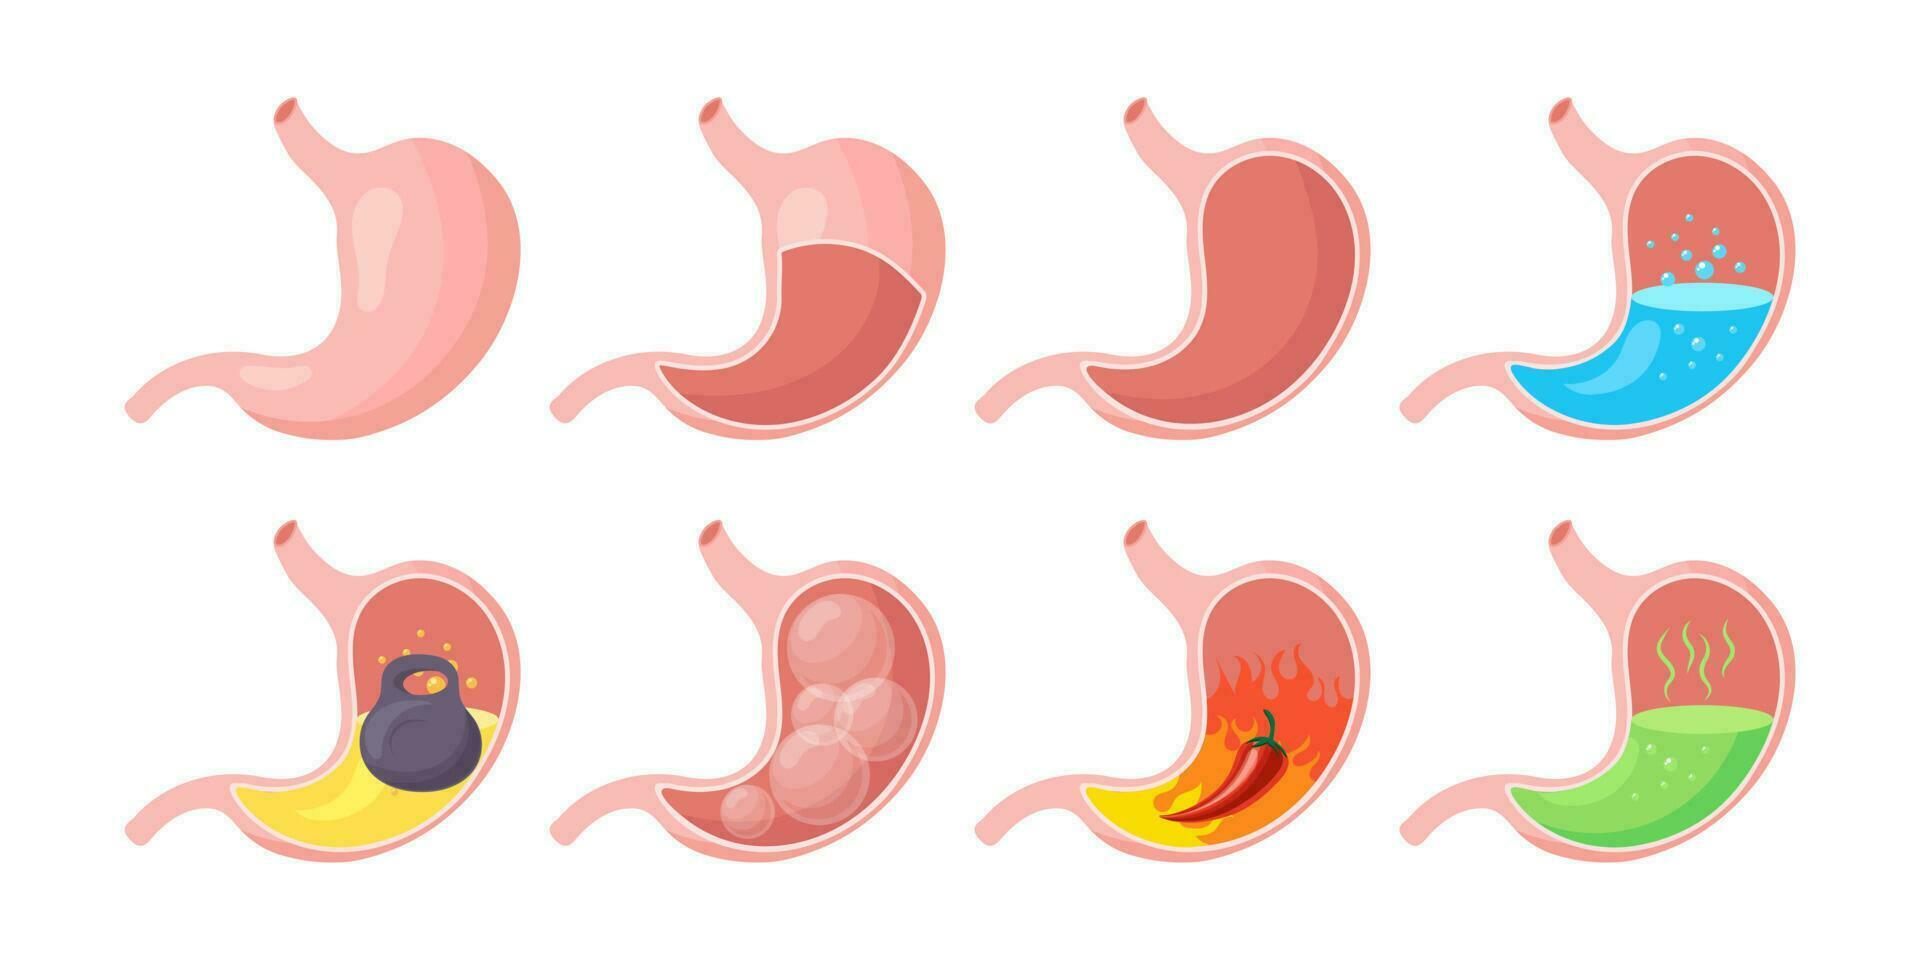 Healthy and unhealthy, empty and full human stomach, icons set. Nutrition, stomach pain, heartburn, heaviness, bloating. Anatomy of the digestive system. vector